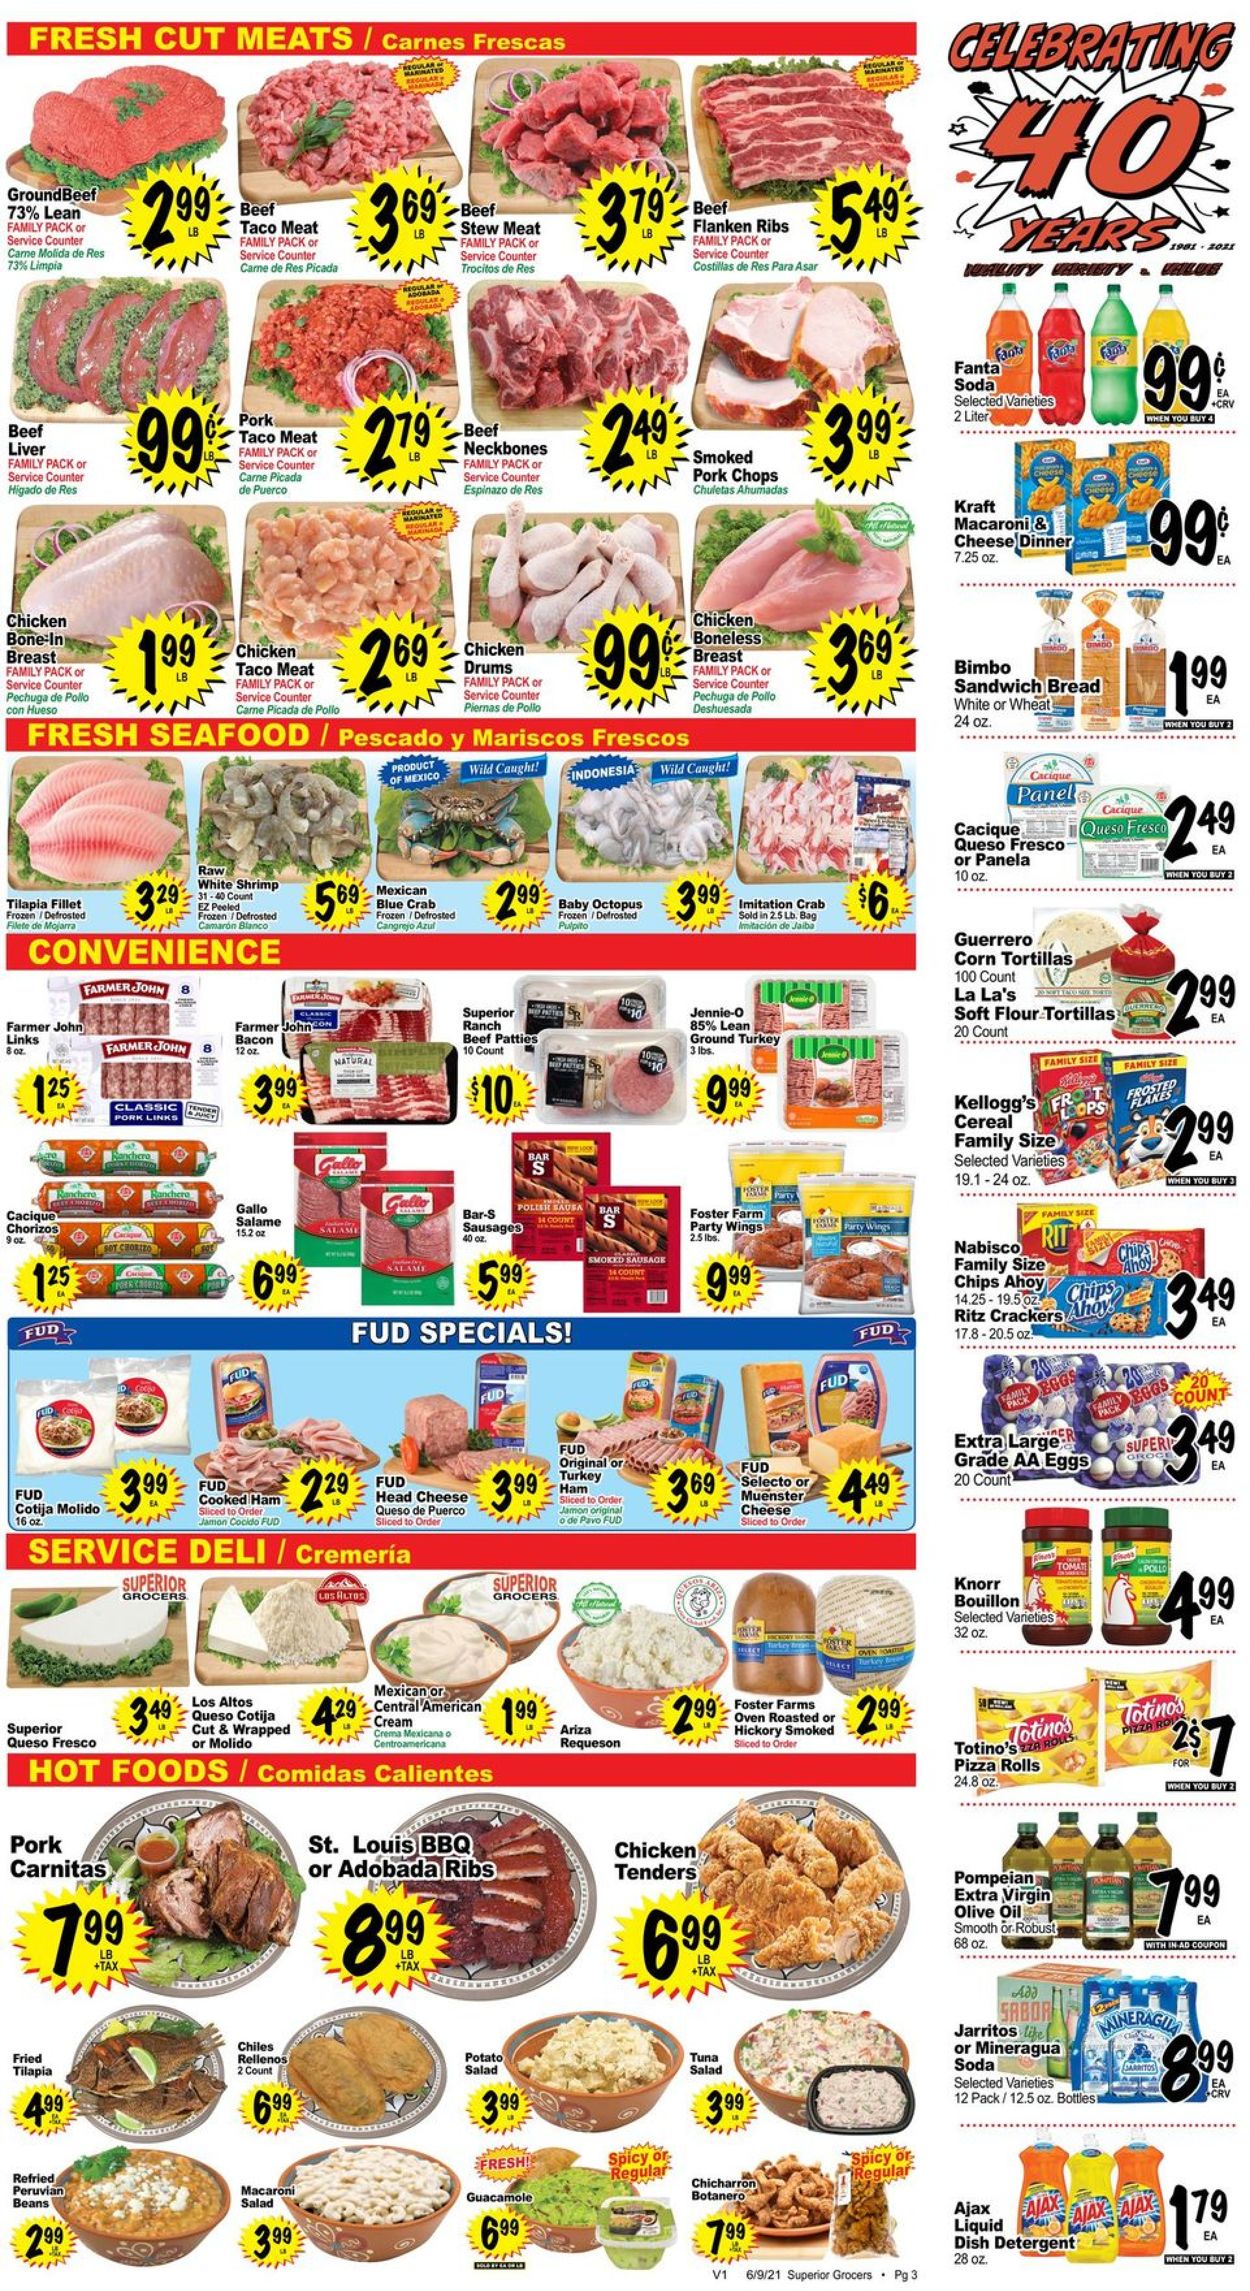 Catalogue Superior Grocers from 06/09/2021